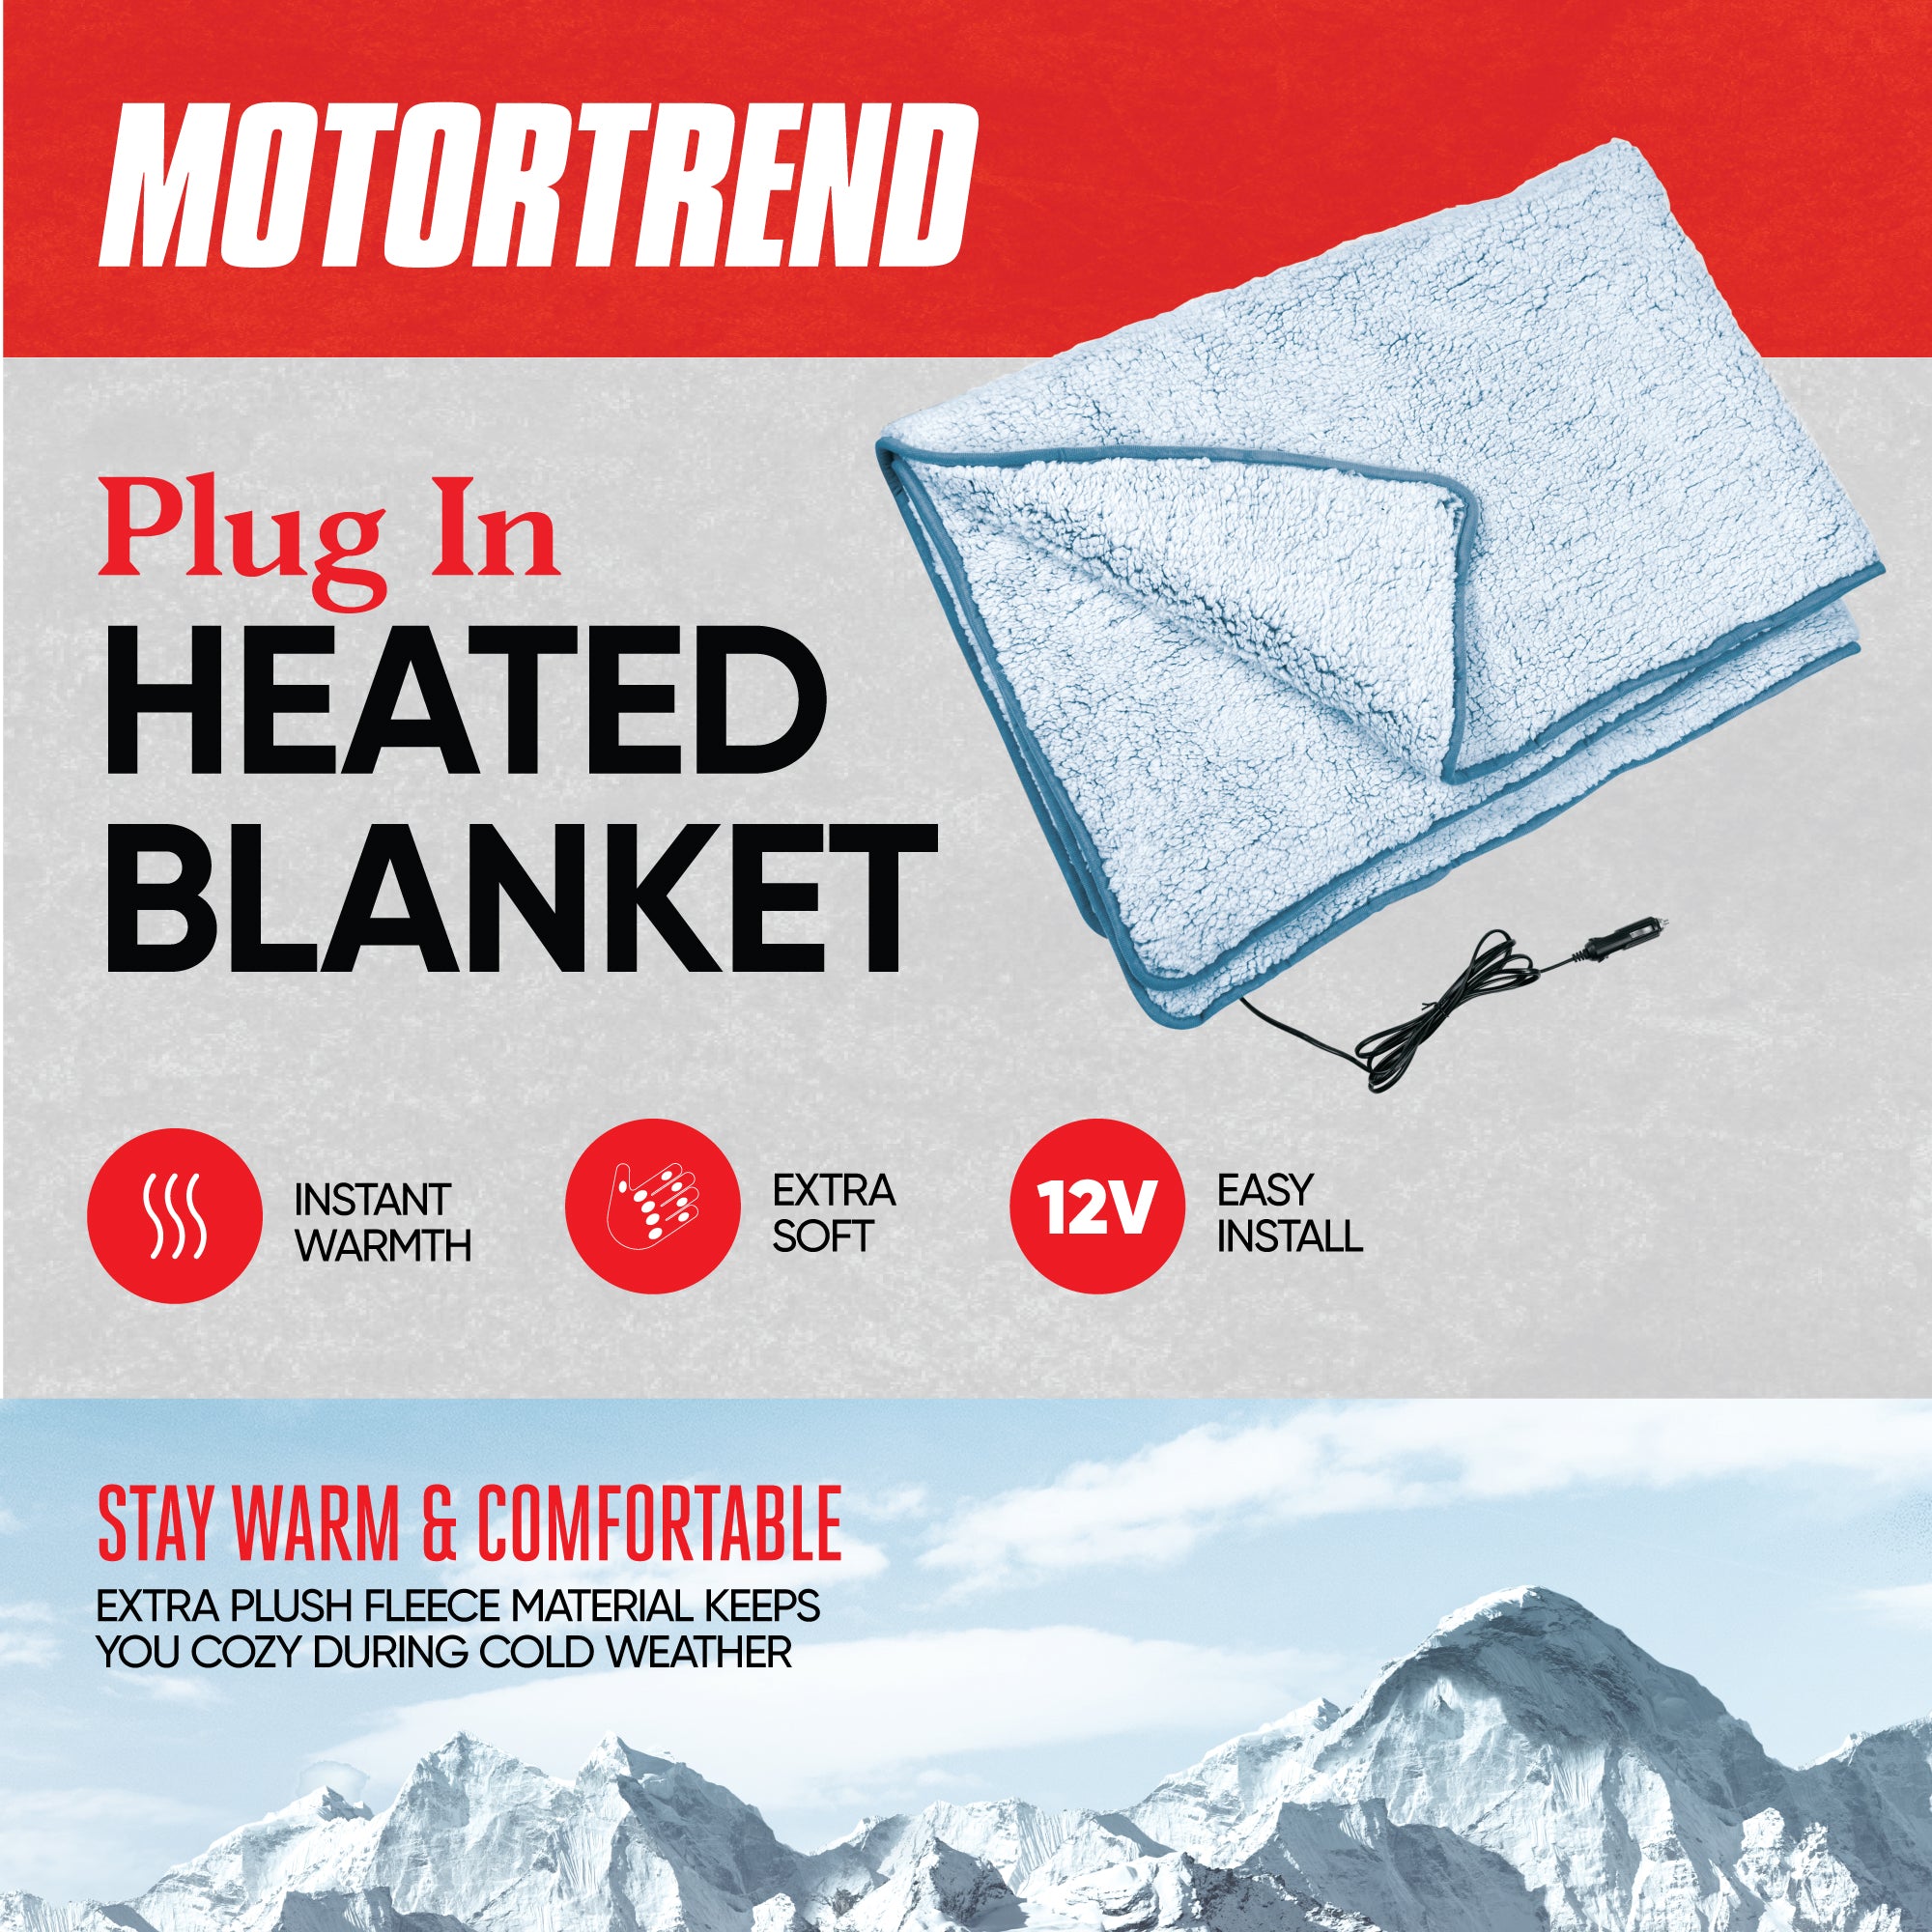 Motor Trend 12V Heated Blanket for Car, Gray – Full-Size Heated Car Blanket with Quick Warming Action, Plush Fleece Electric Car Blanket with 78” Long Cable, Ideal Car Heated Blanket for Cold Weather